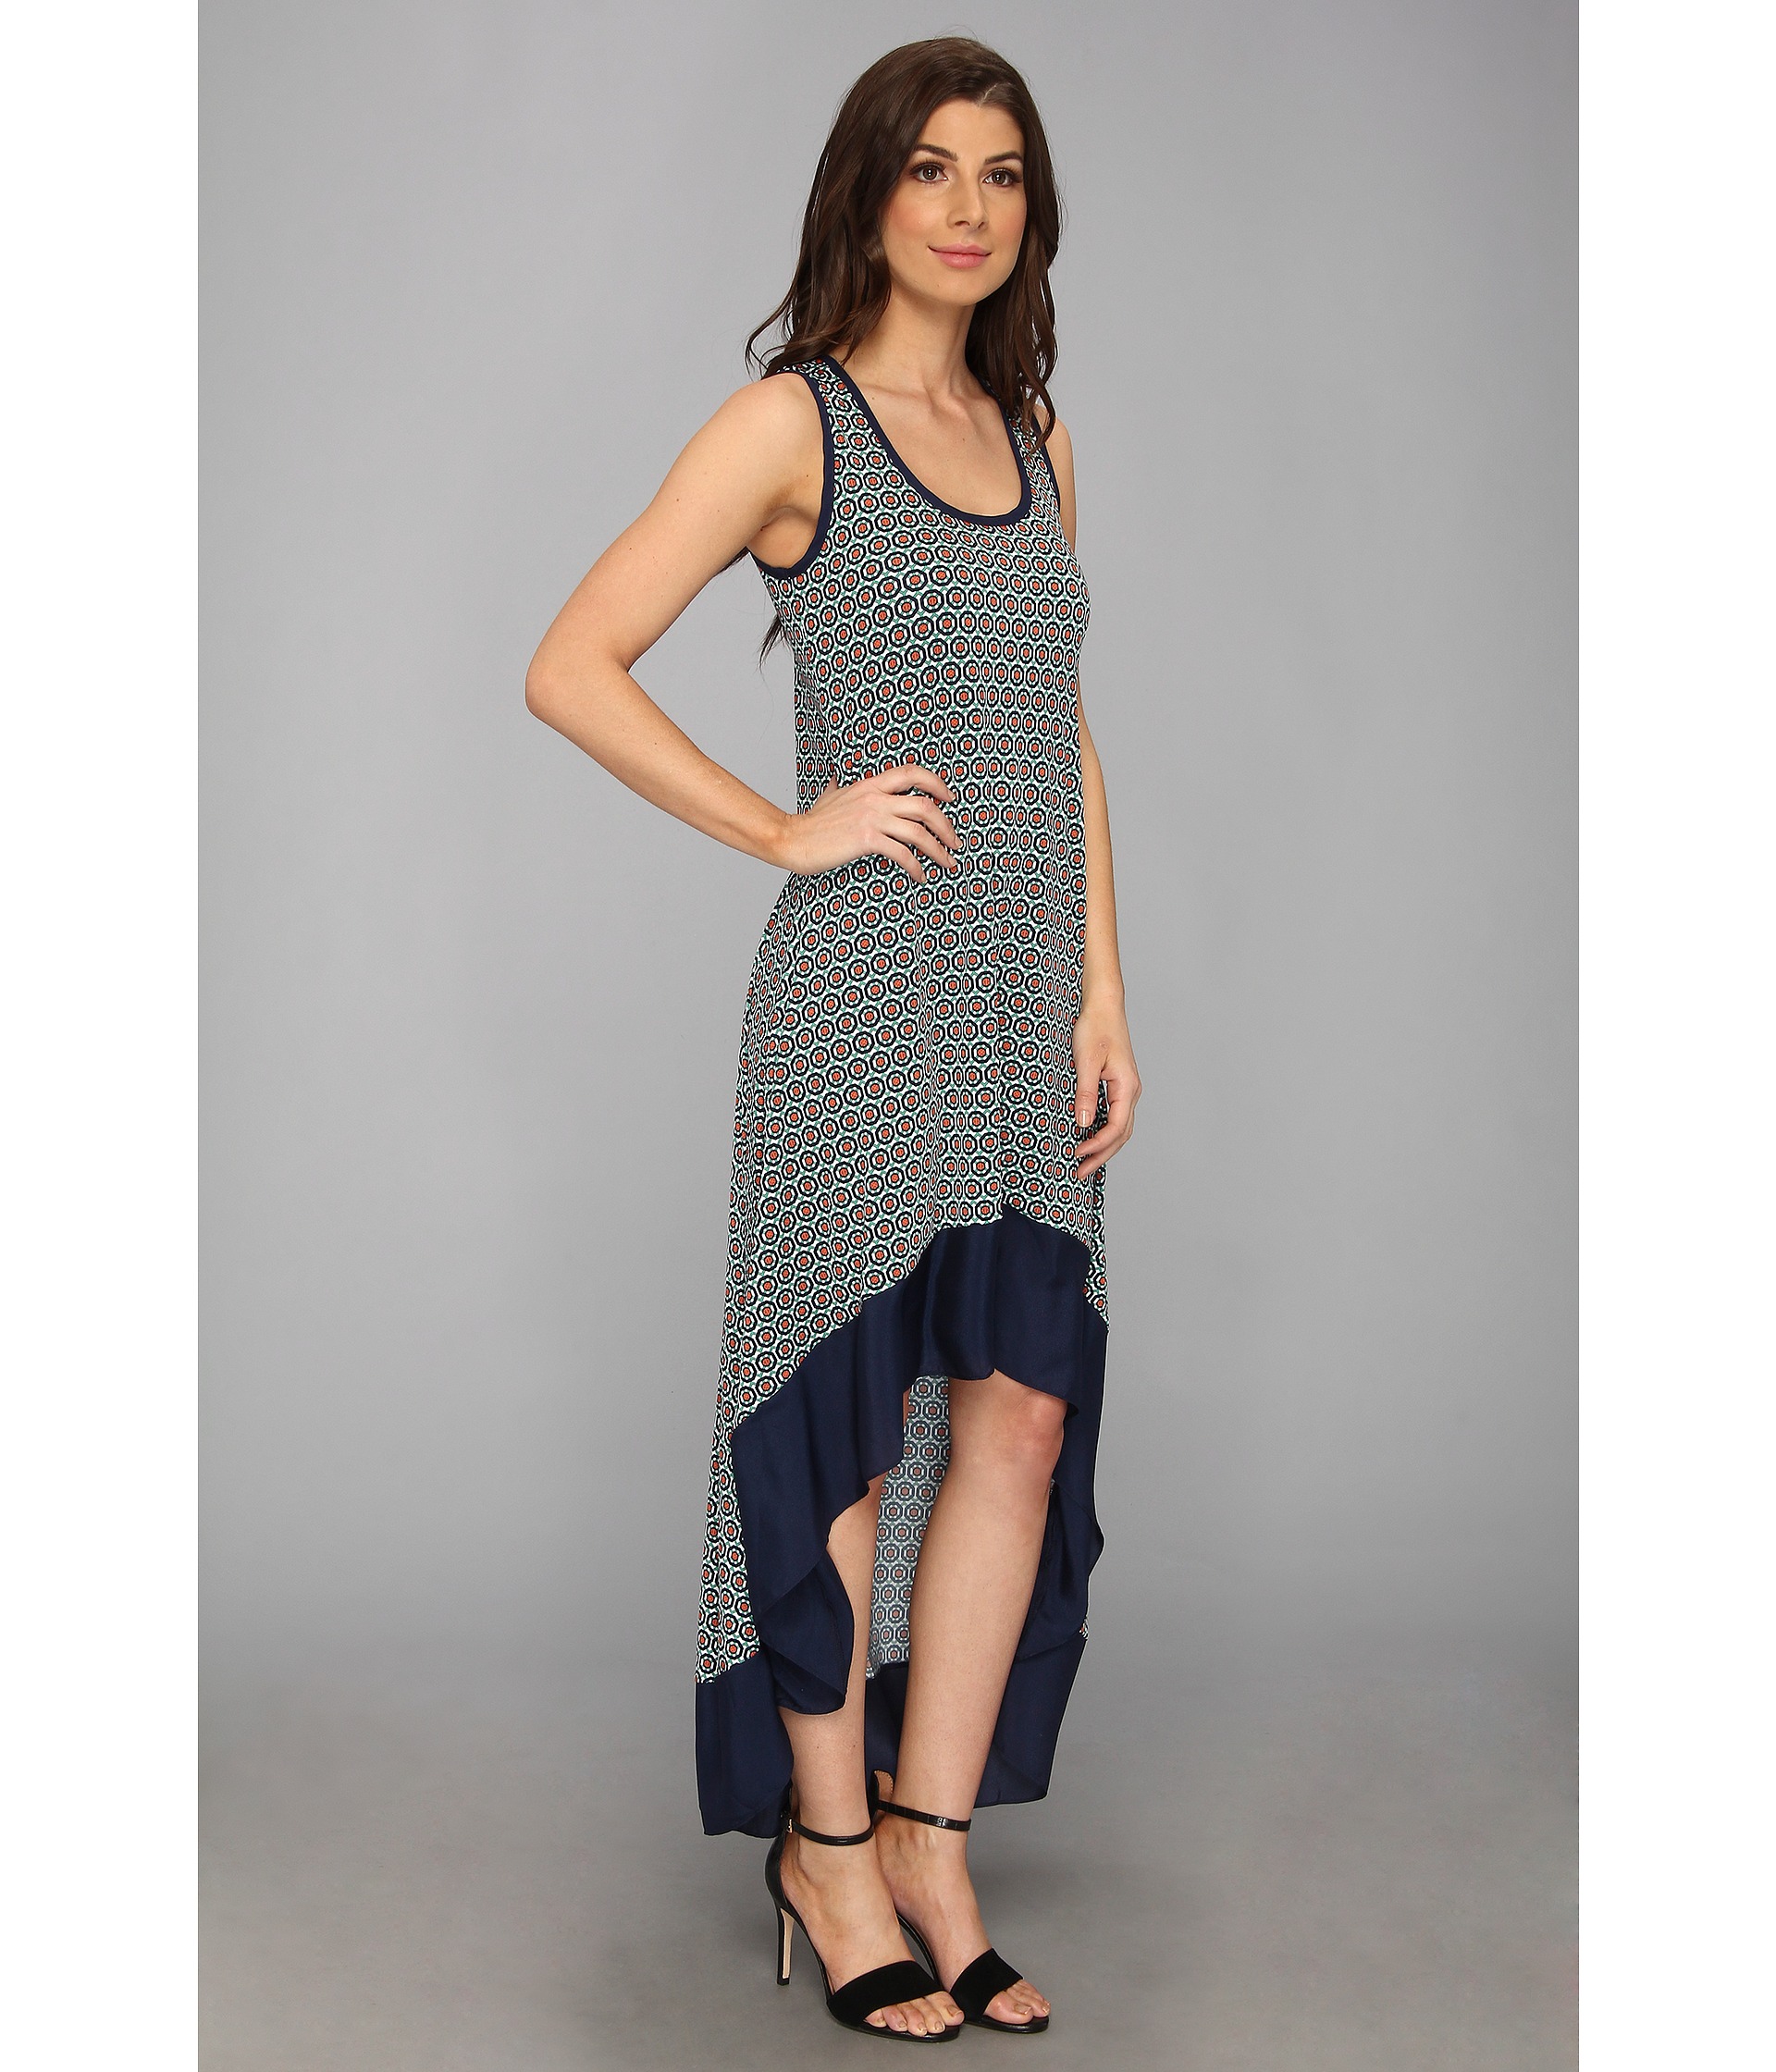 Tbags Los Angeles High Low Tank Dress w/ Contrast Band